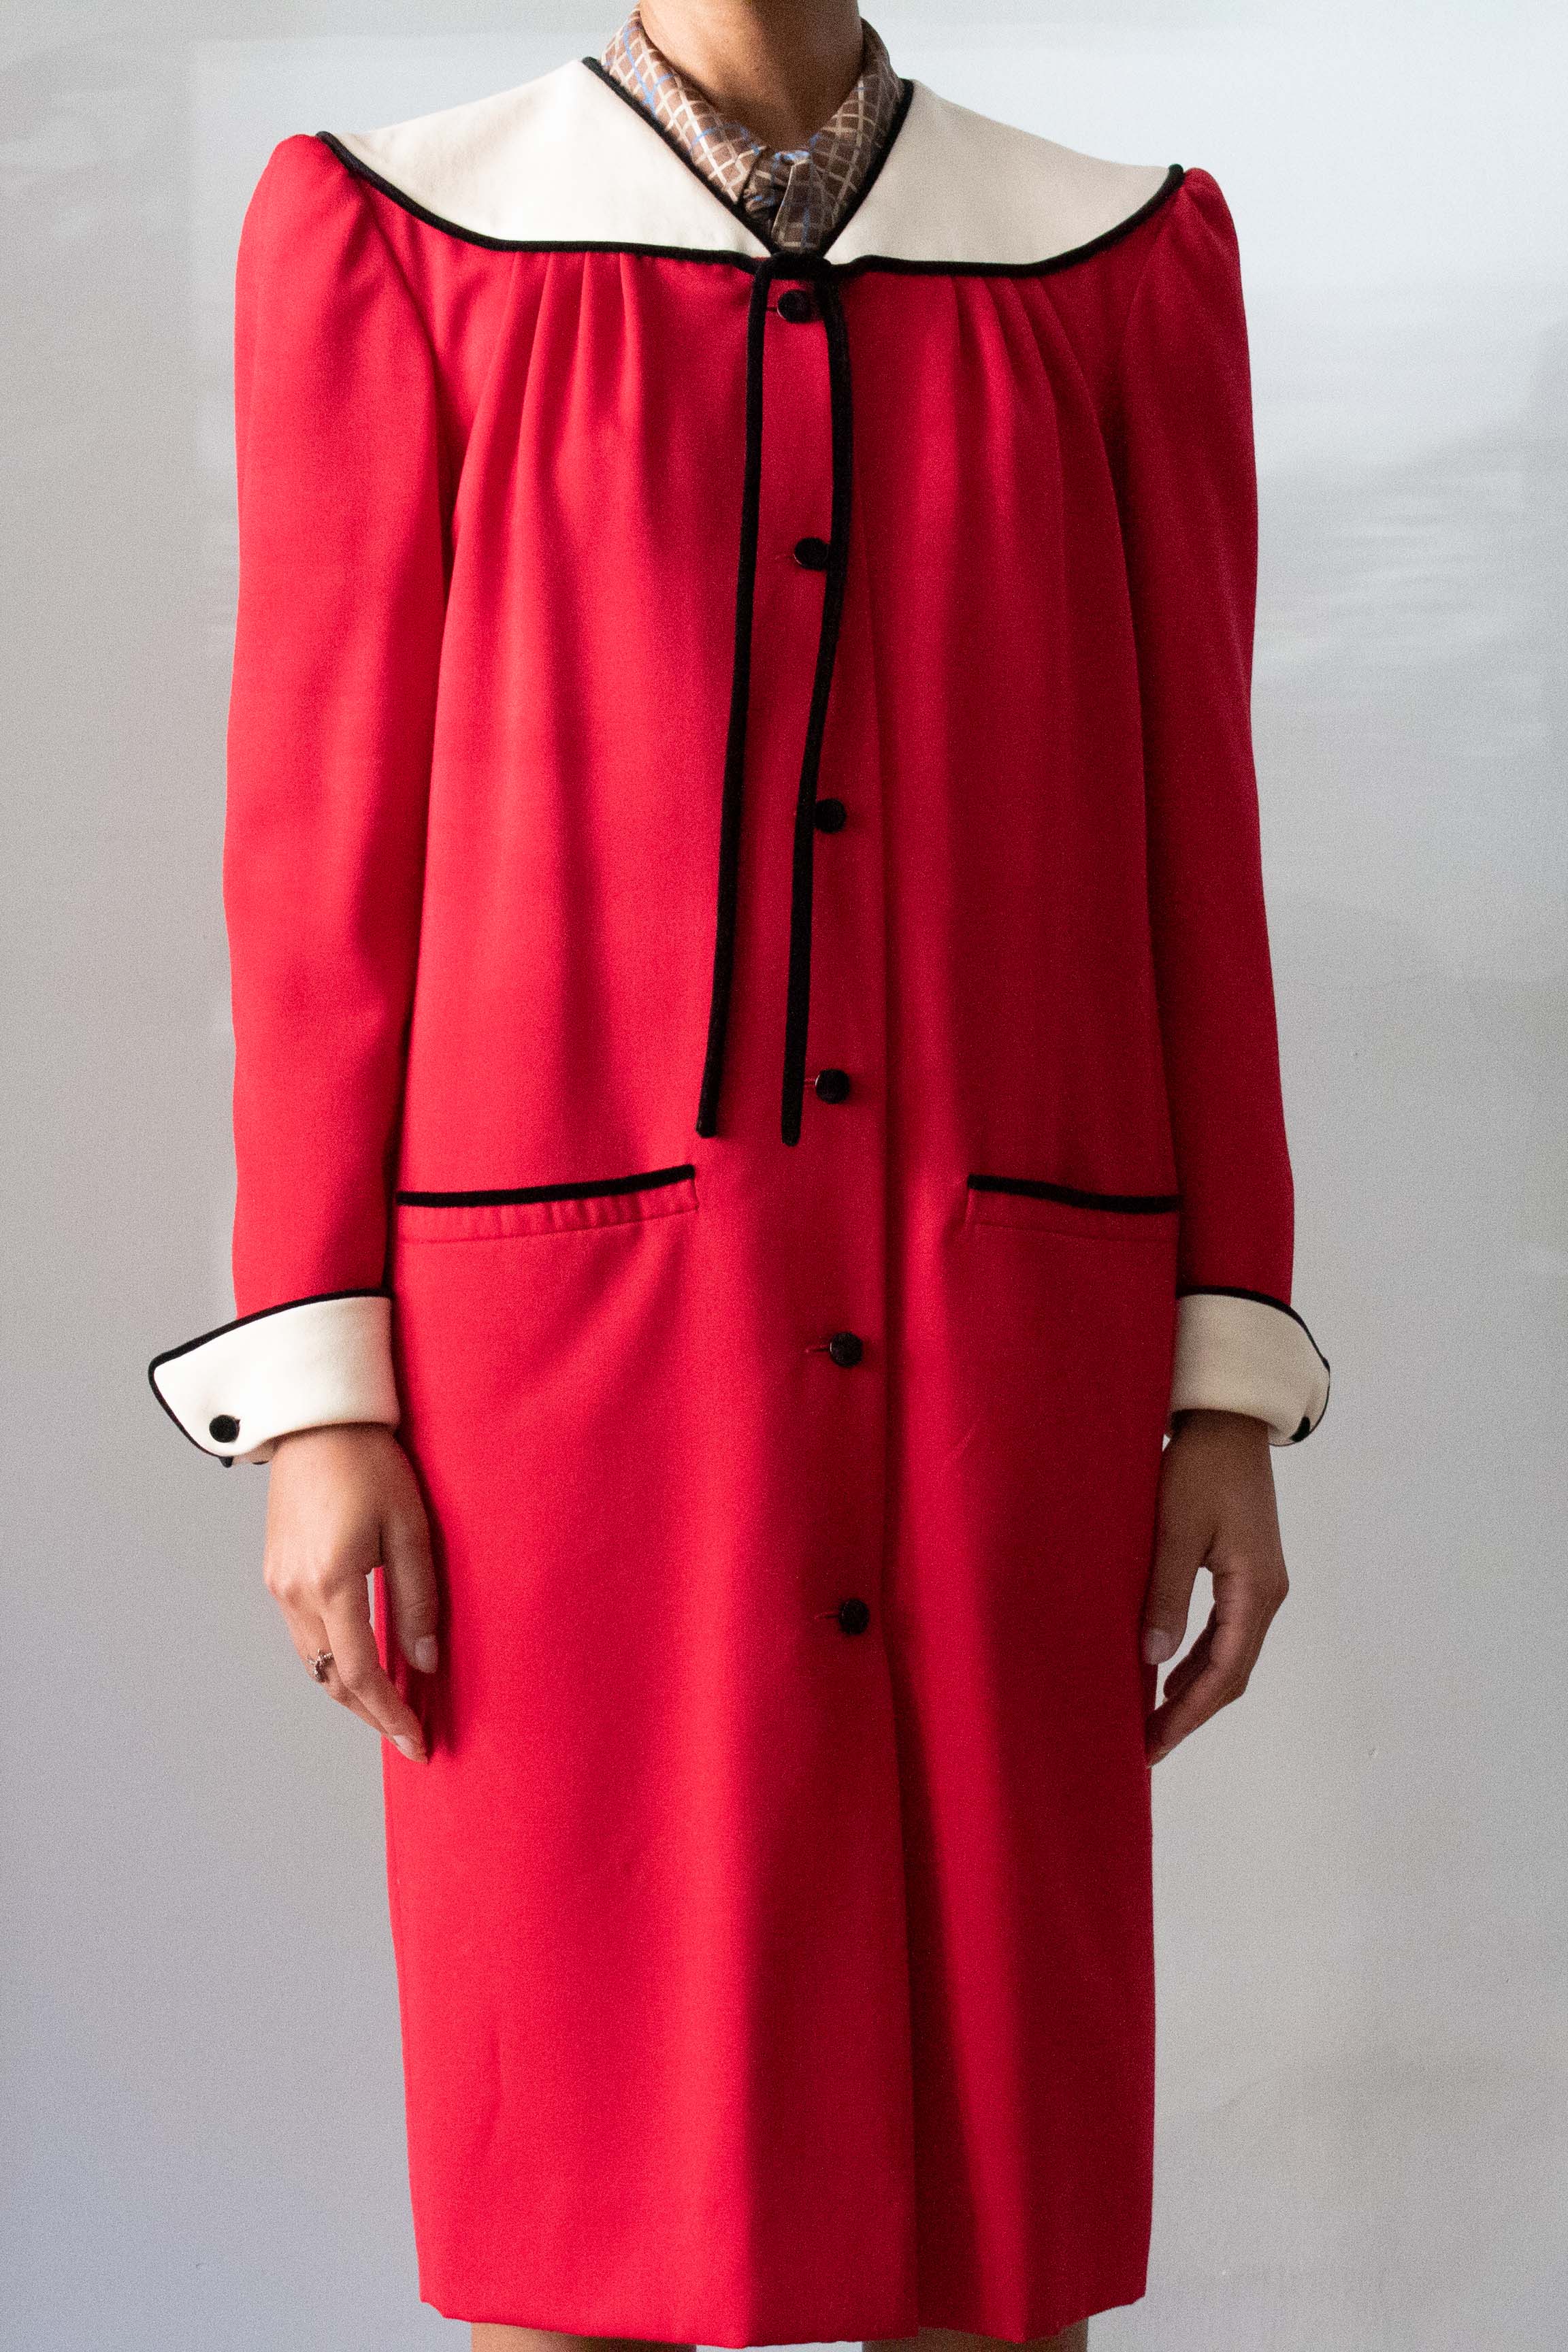 Valentino Boutique Red, White, and Black Color Block Coat Dress